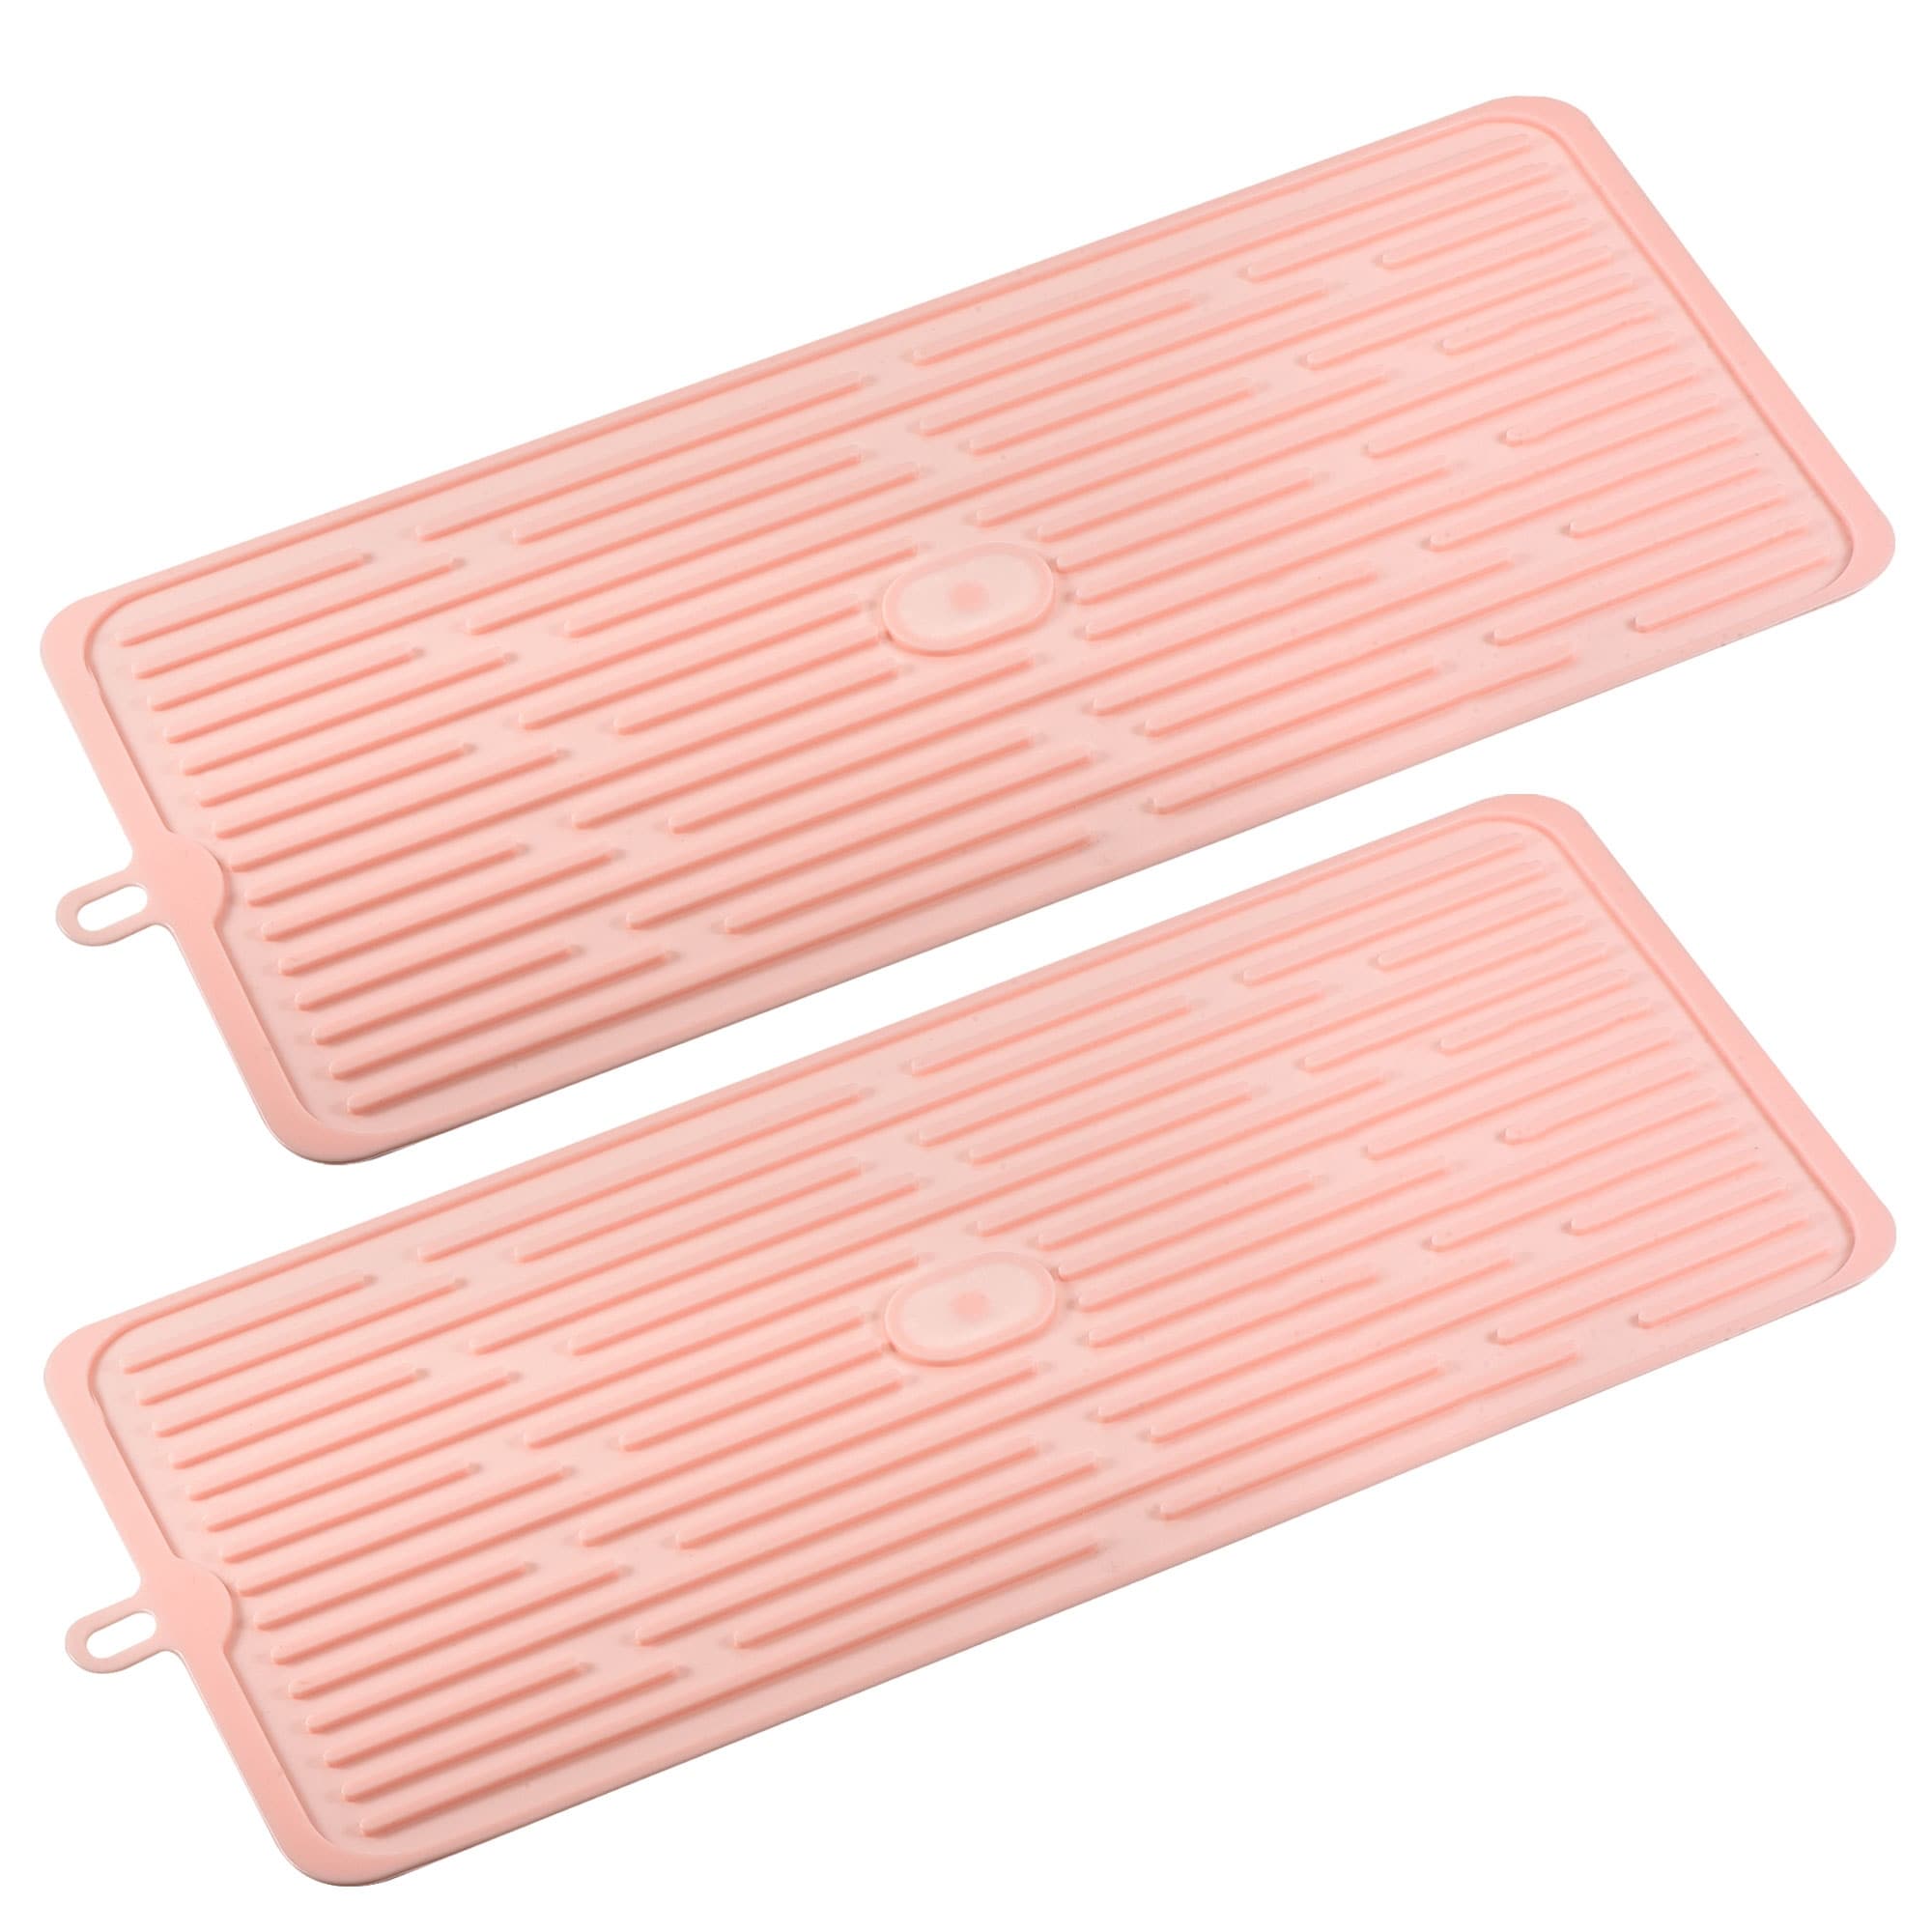 https://ak1.ostkcdn.com/images/products/is/images/direct/6cbb784bf74310657a80b265fe04dc8e36d72f01/Silicone-Dish-Drying-Mat%2C-2Pcs-18.5%22-x-8%22-Kitchen-Countertop-Drain-Mat---Pink.jpg